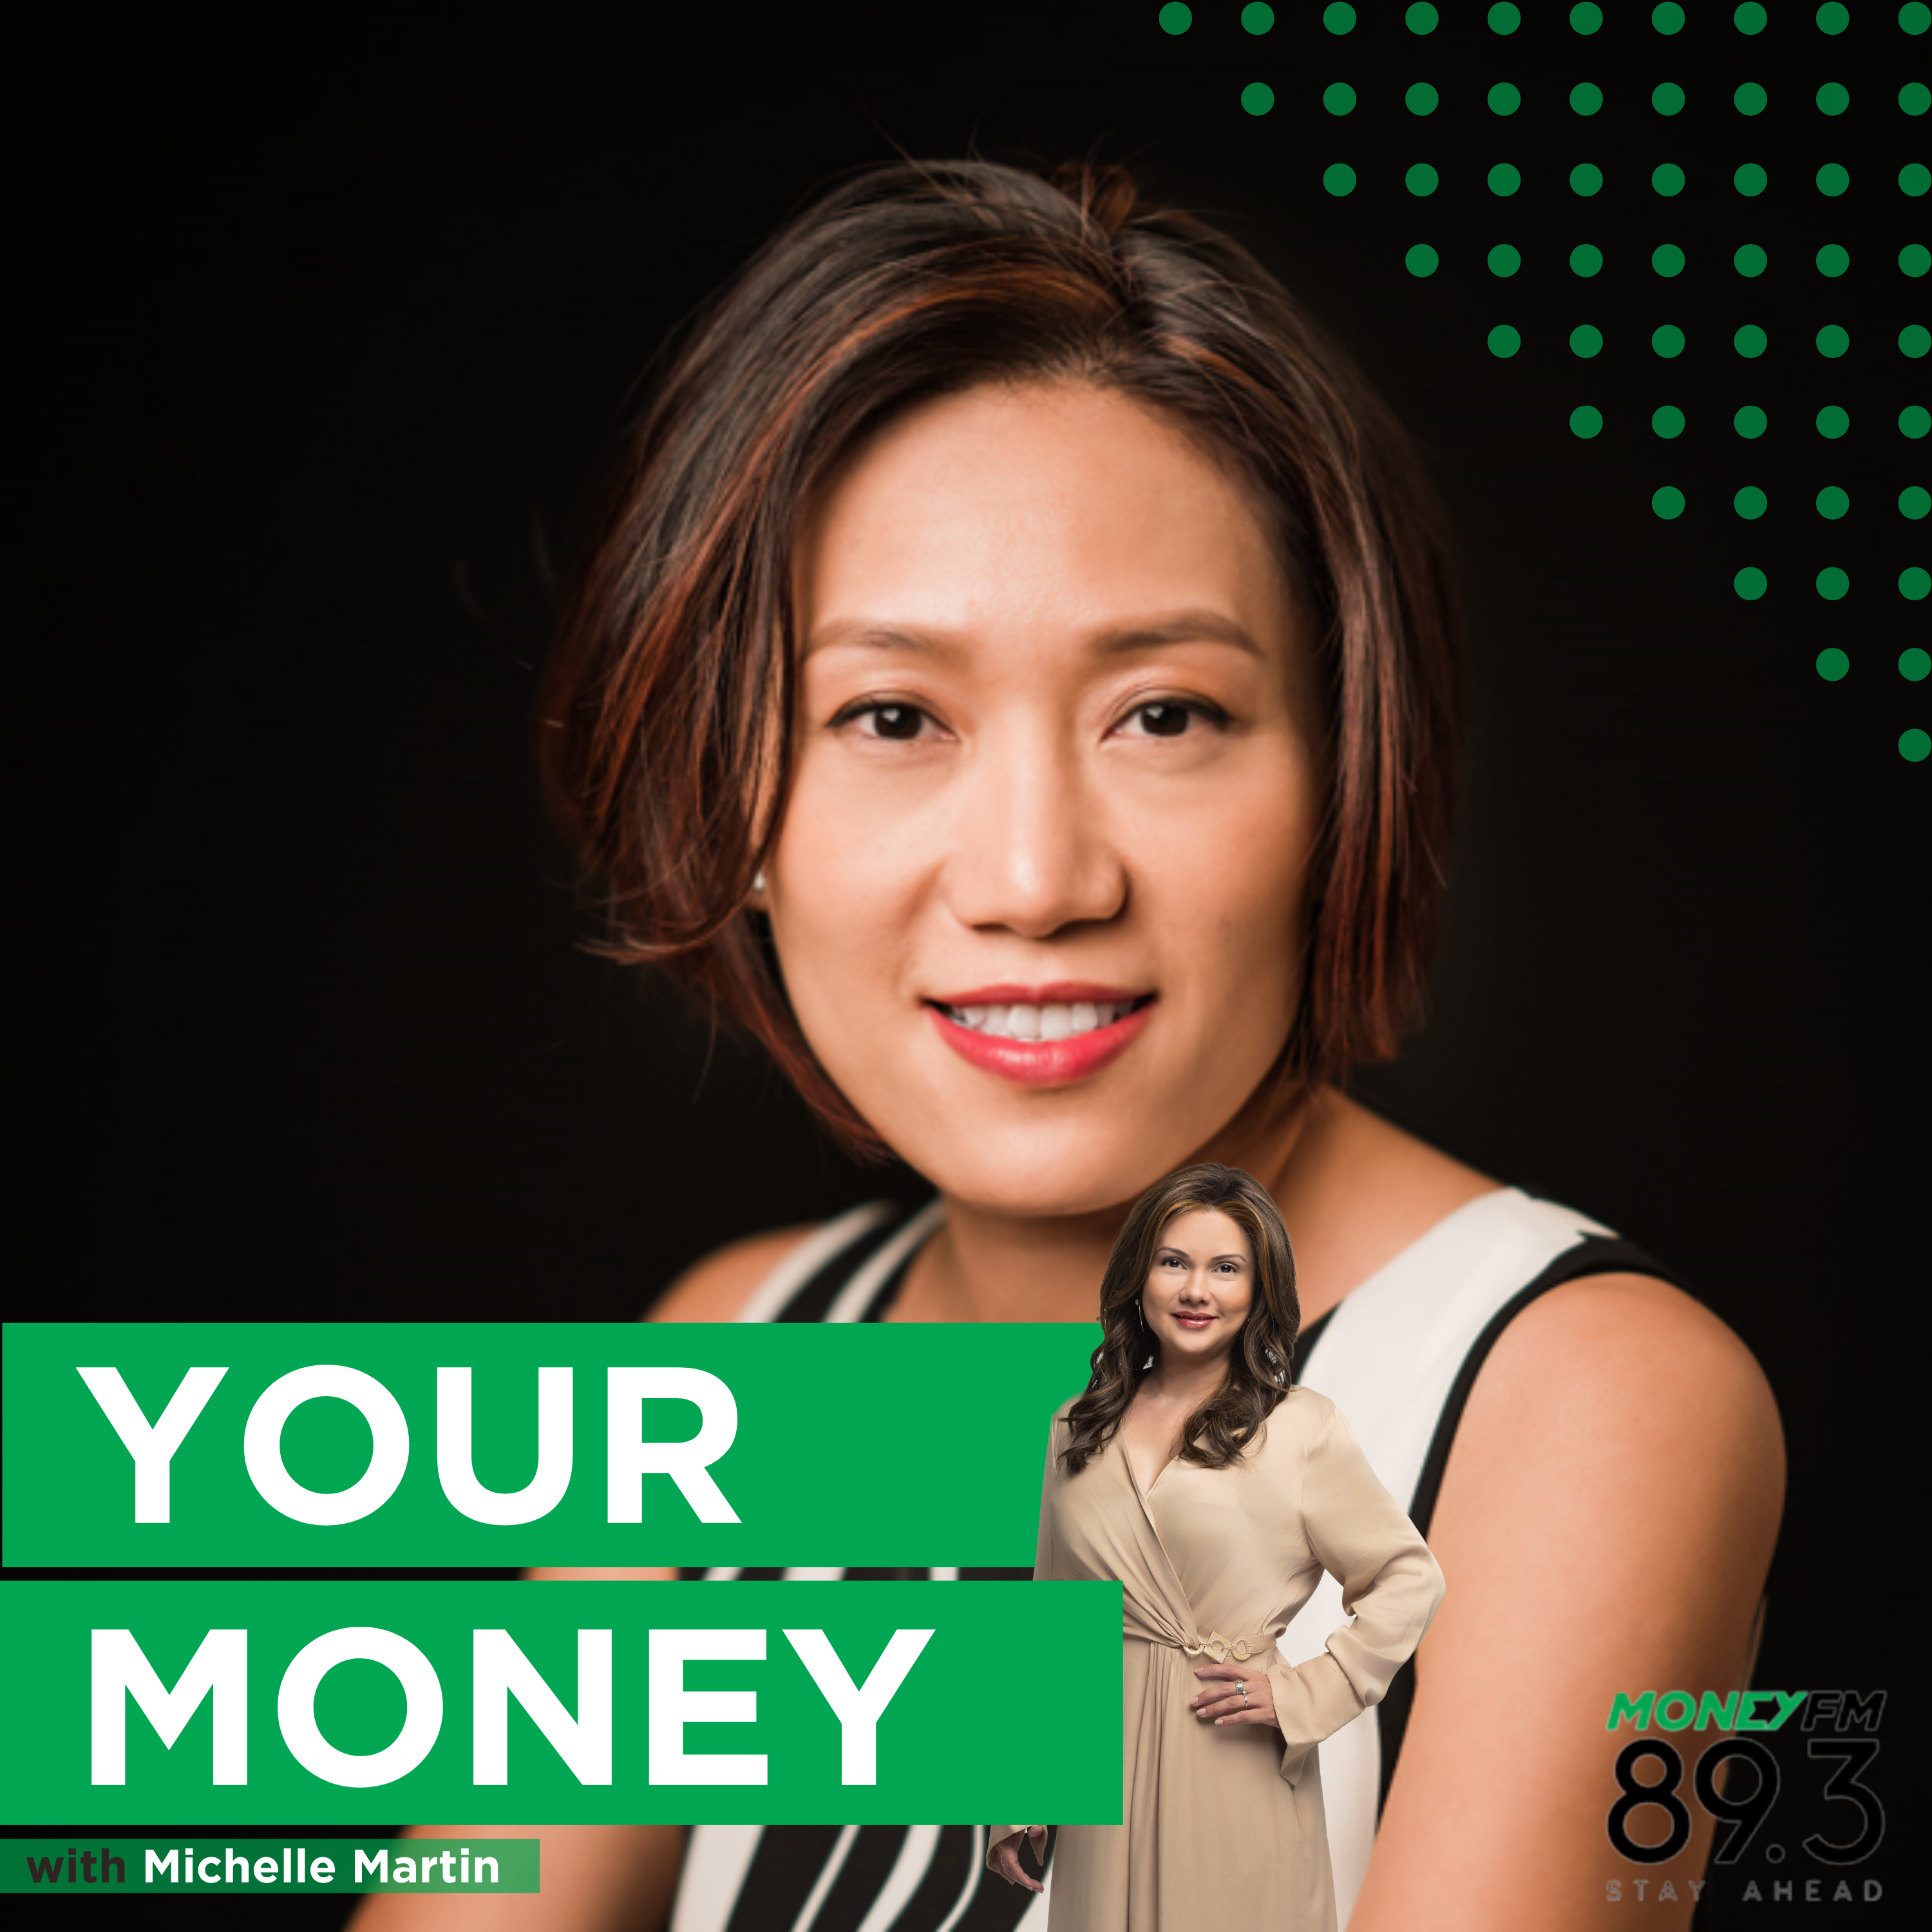 Money and Me: How do you prepare yourself for your next overseas opportunity?